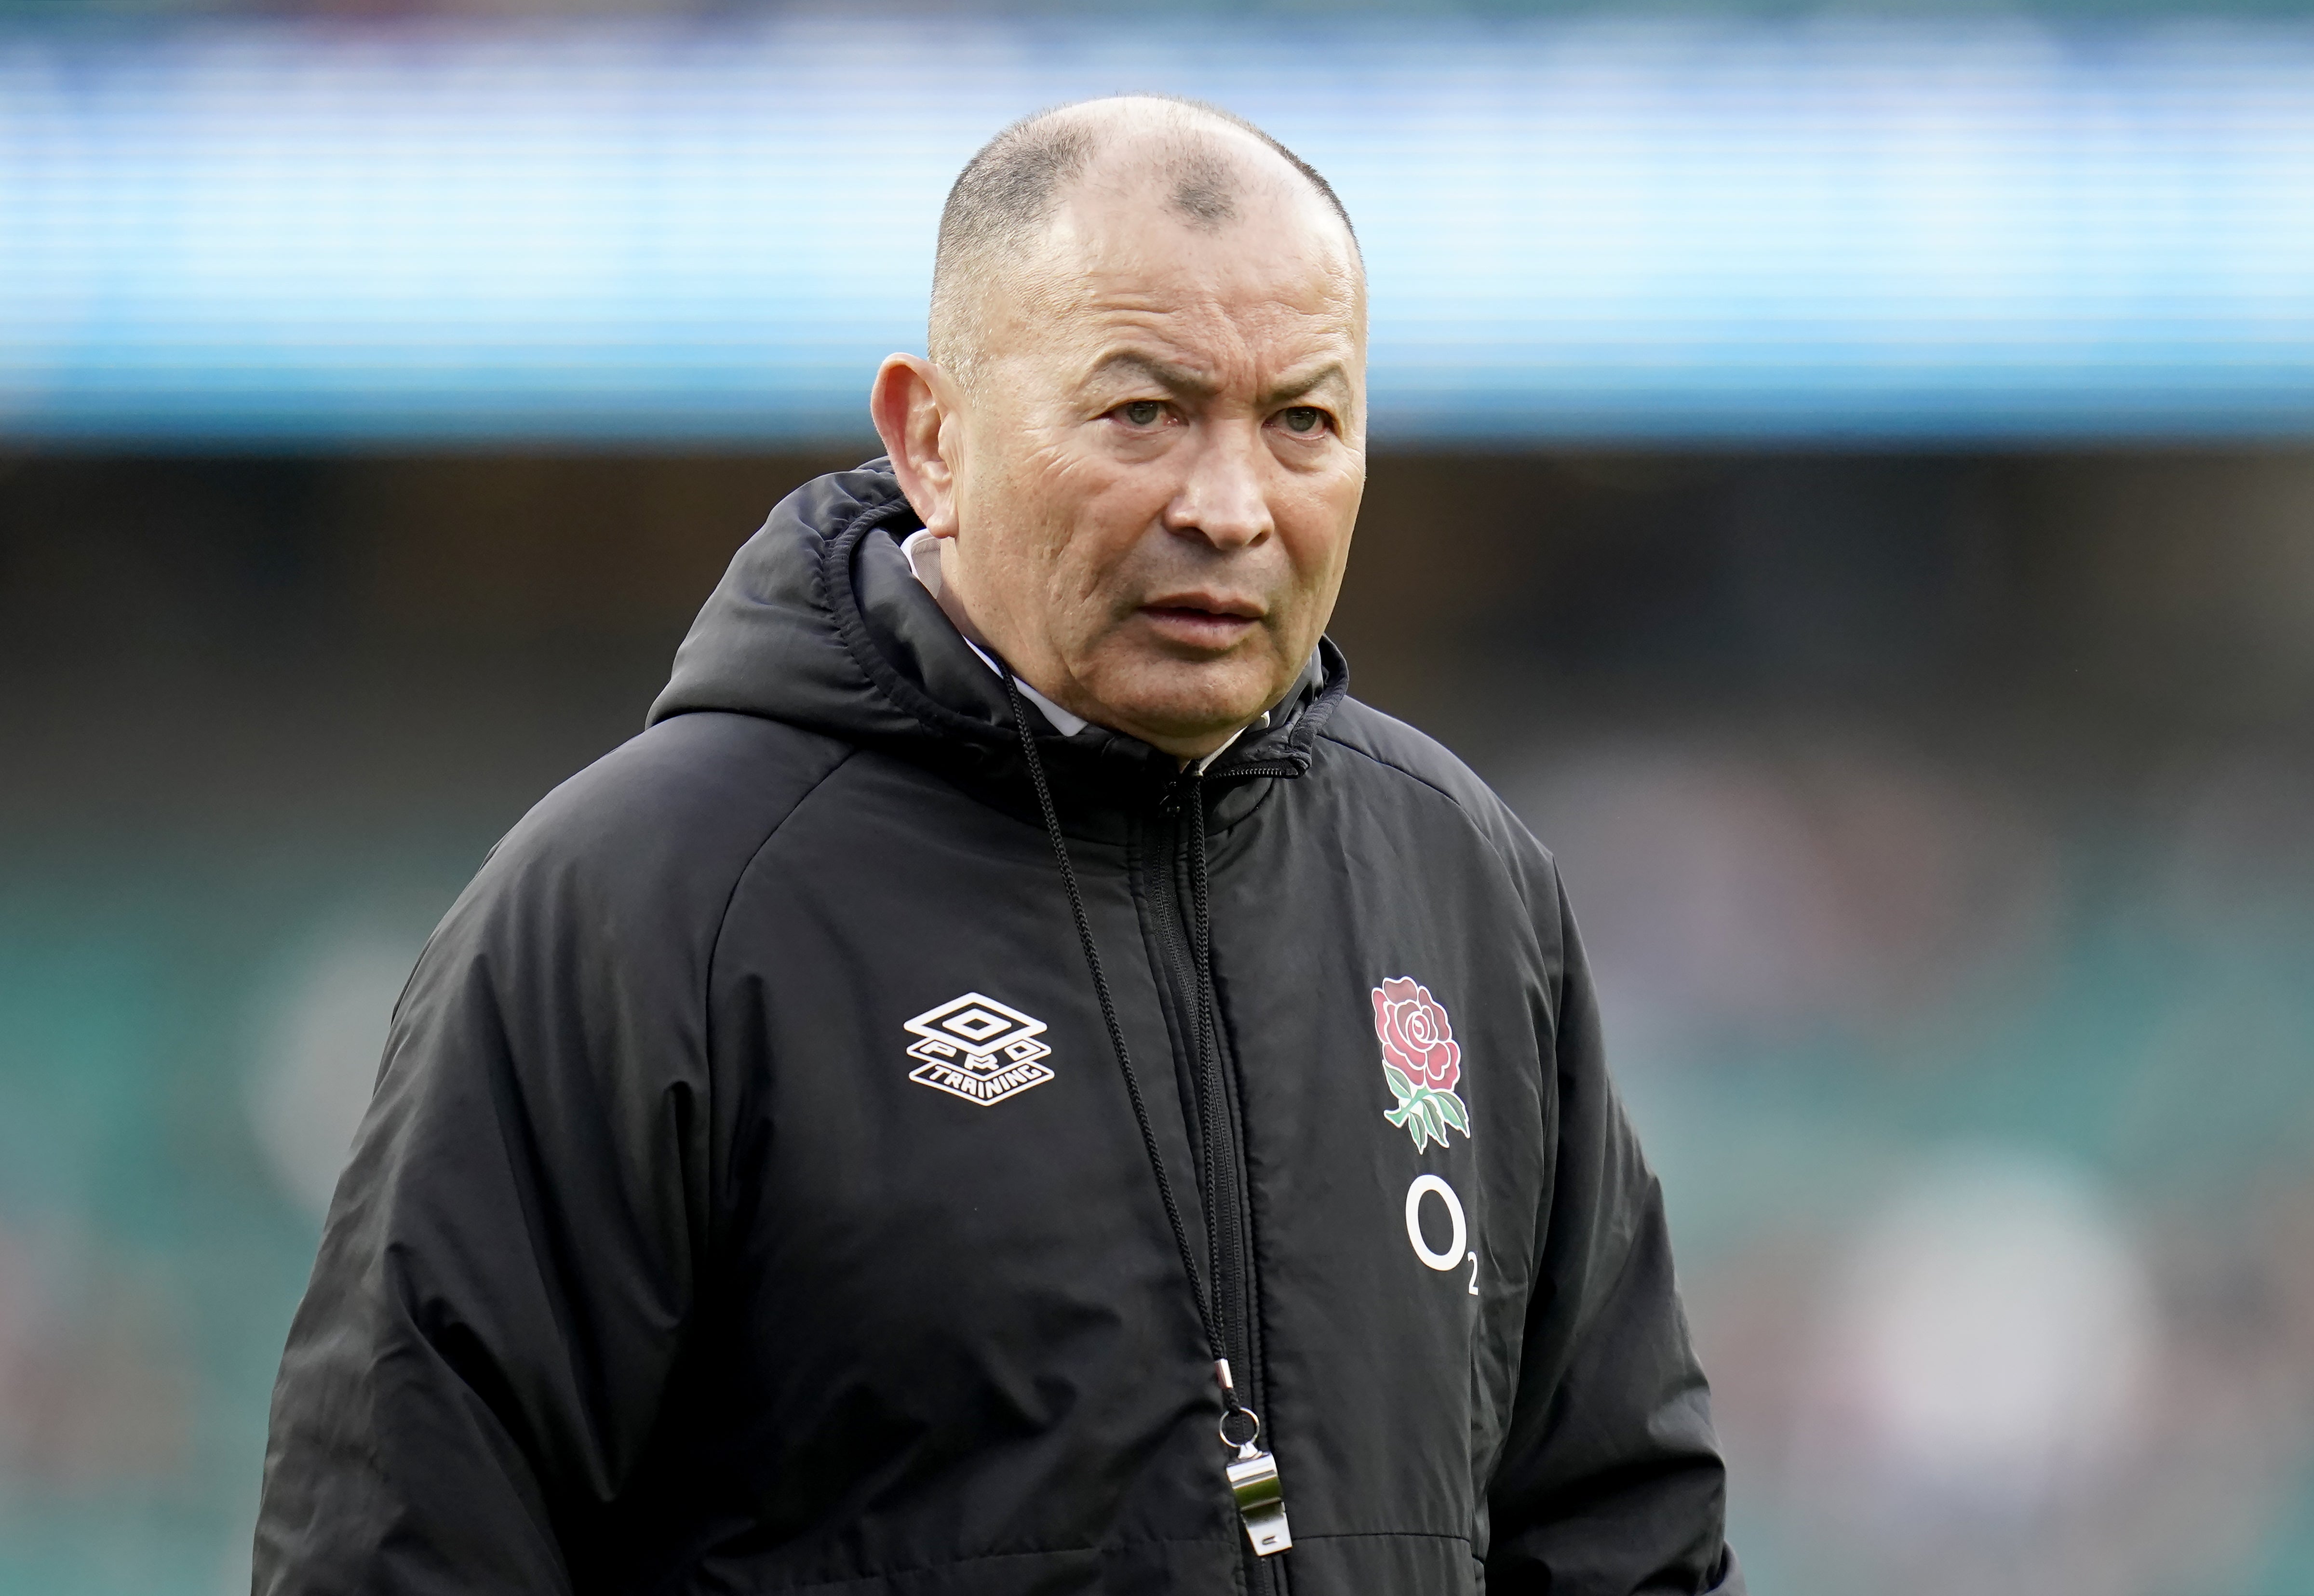 Eddie Jones has presided over another disappointing Six Nations